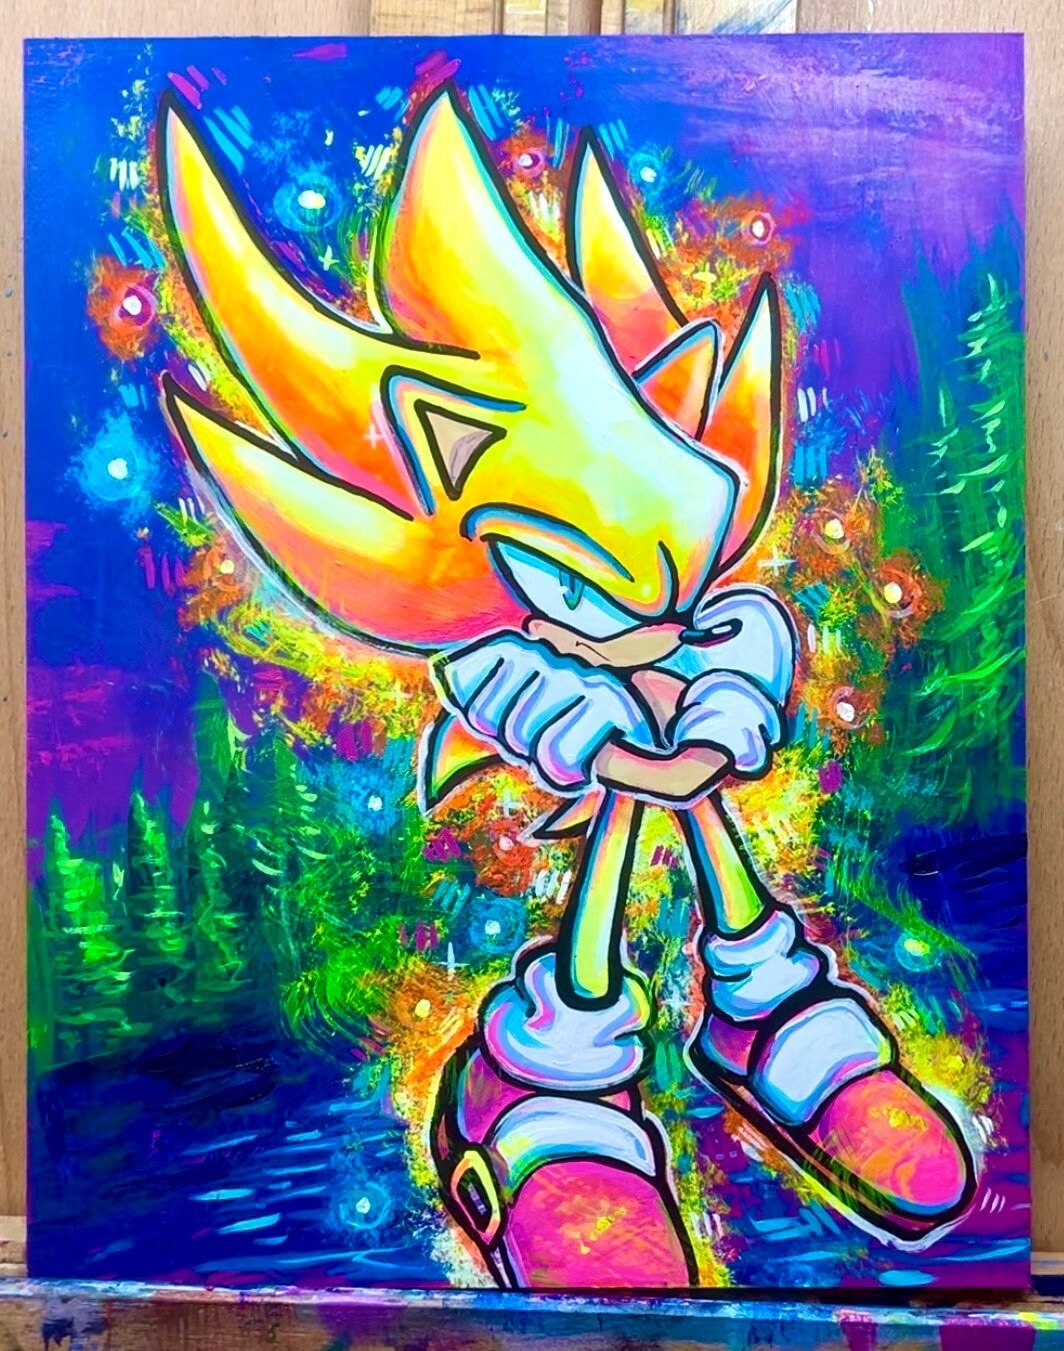 8x10 inch Super Sanic Original Acrylic Painting - Videogame Decor, Gift for Gamers